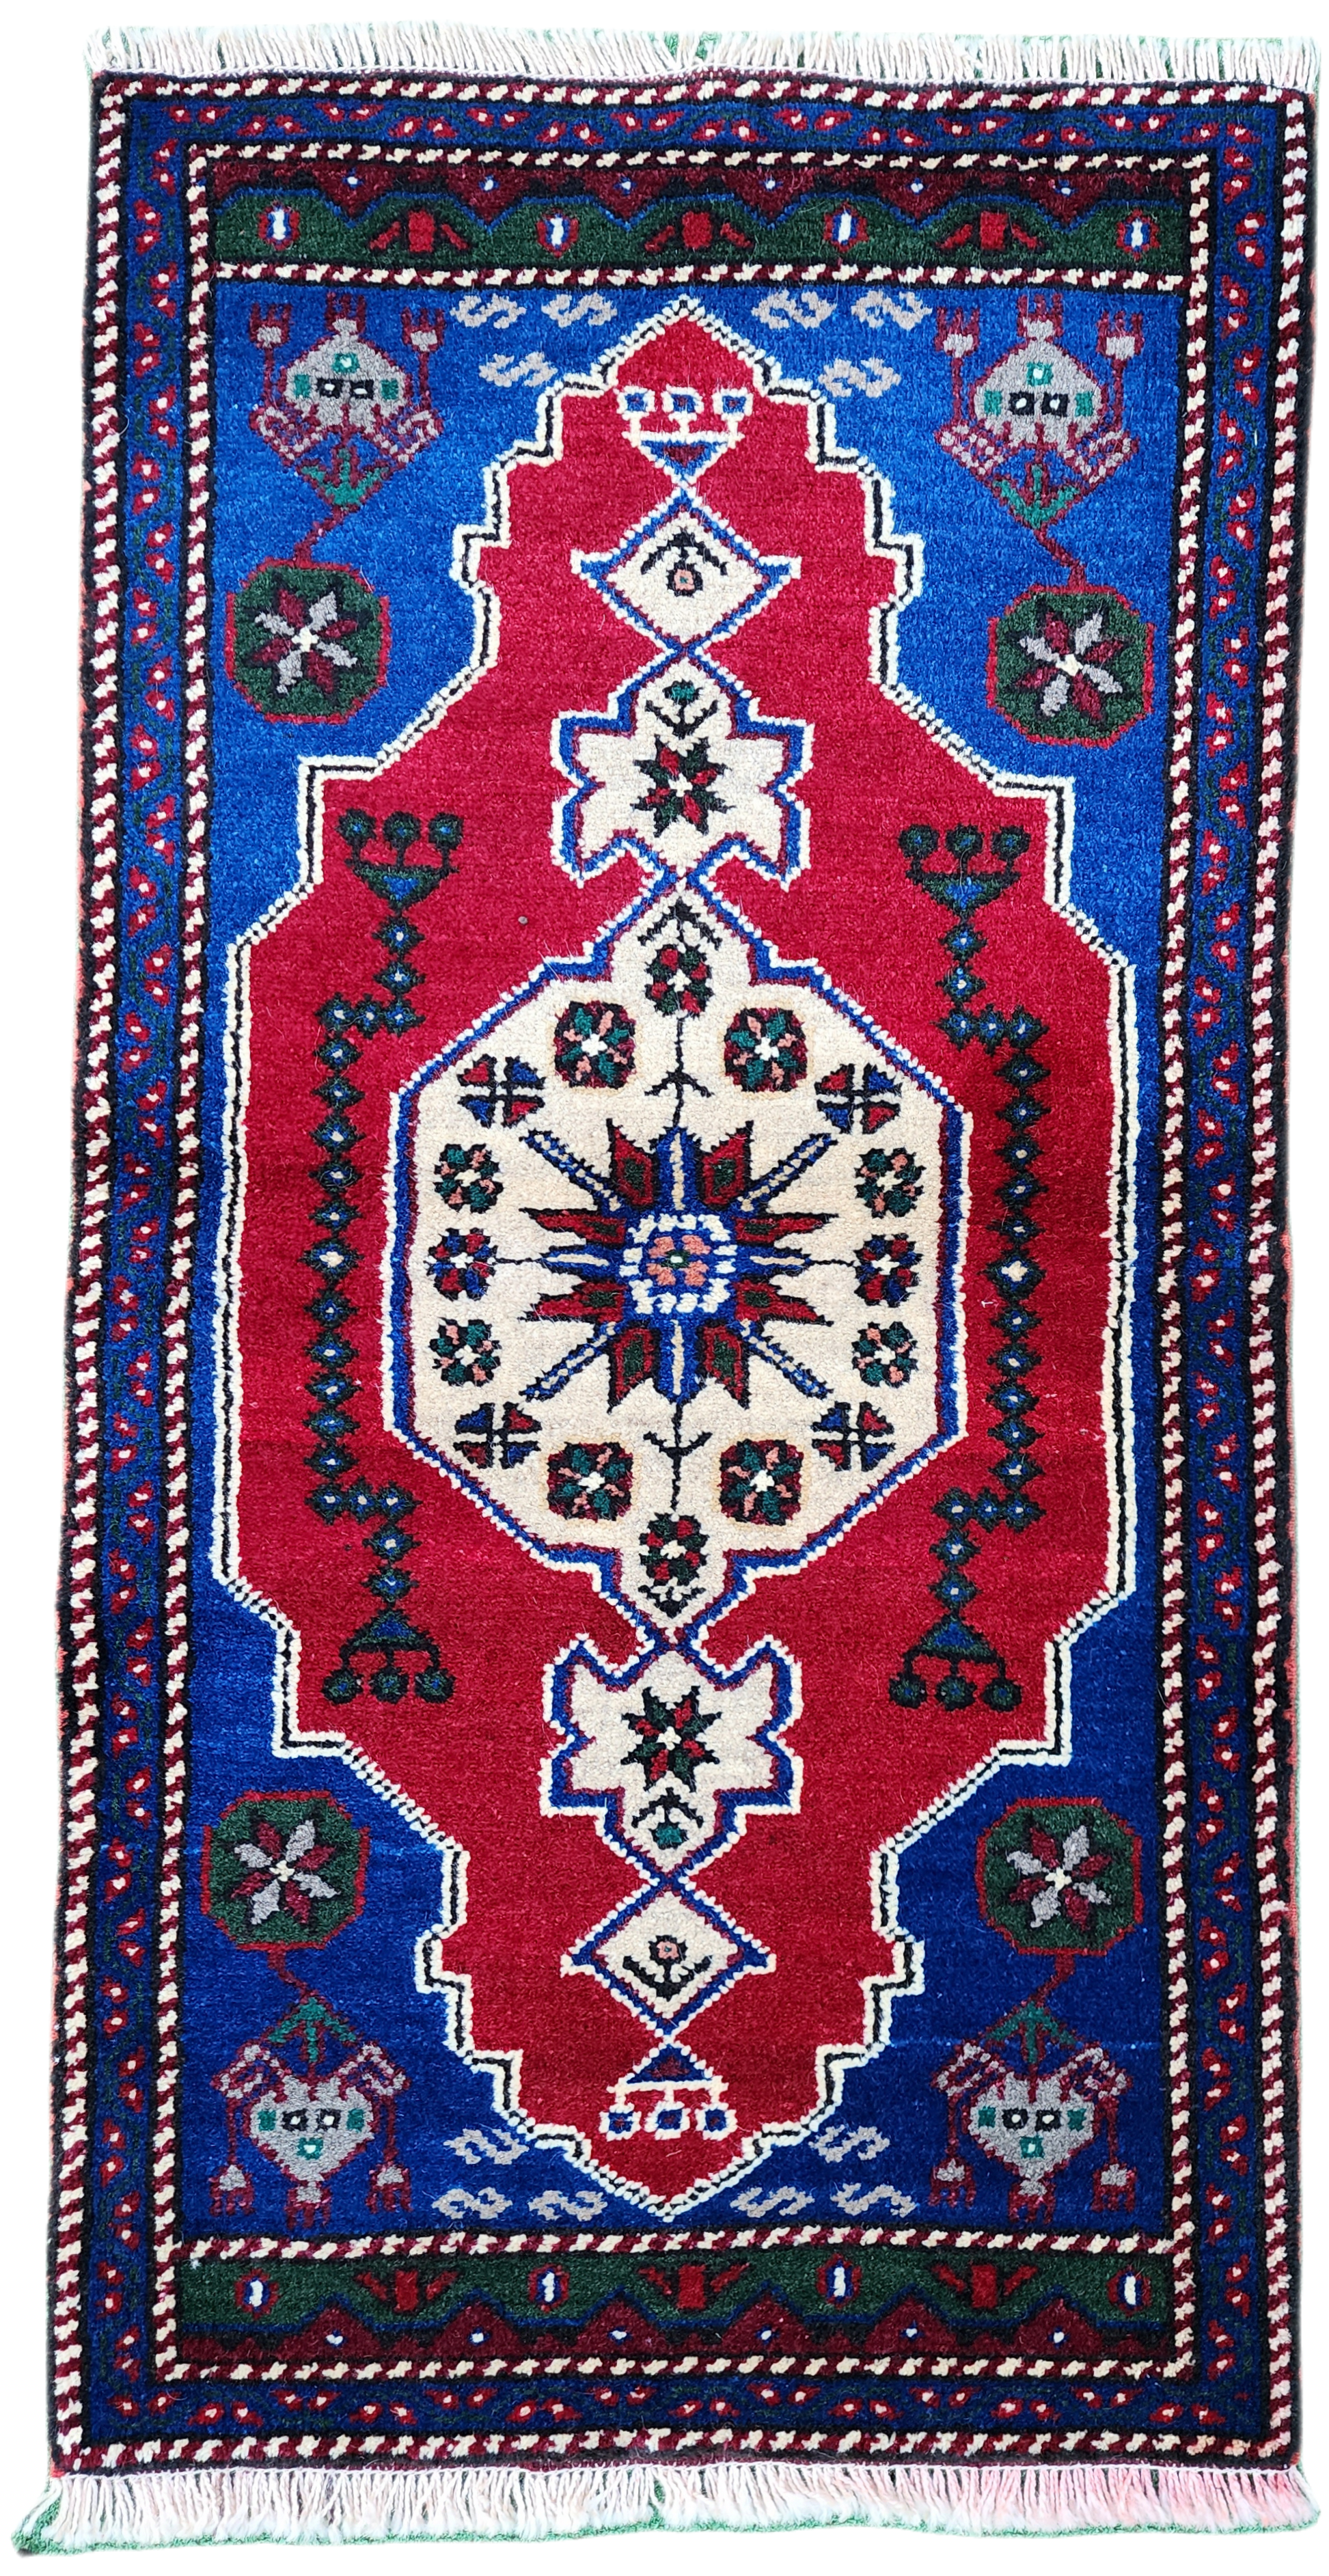 Small Turkish Rug, 3 ft 3 in x 1 ft 7 in,  Red and Blue Antique Doormat Hallway or Bedside Rug